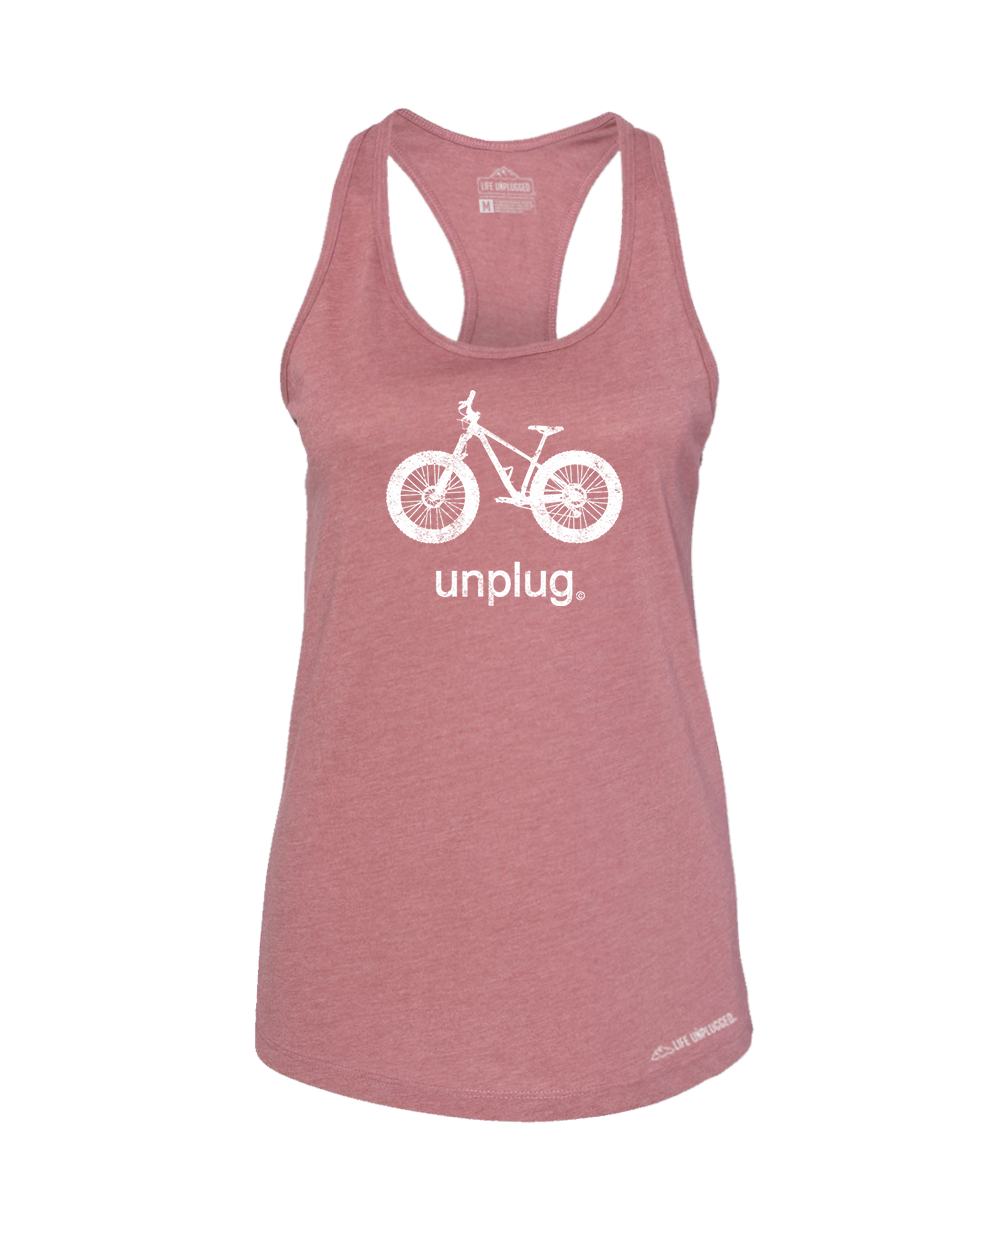 Fat Tire Bike Premium Women's Relaxed Fit Racerback Tank Top - Life Unplugged